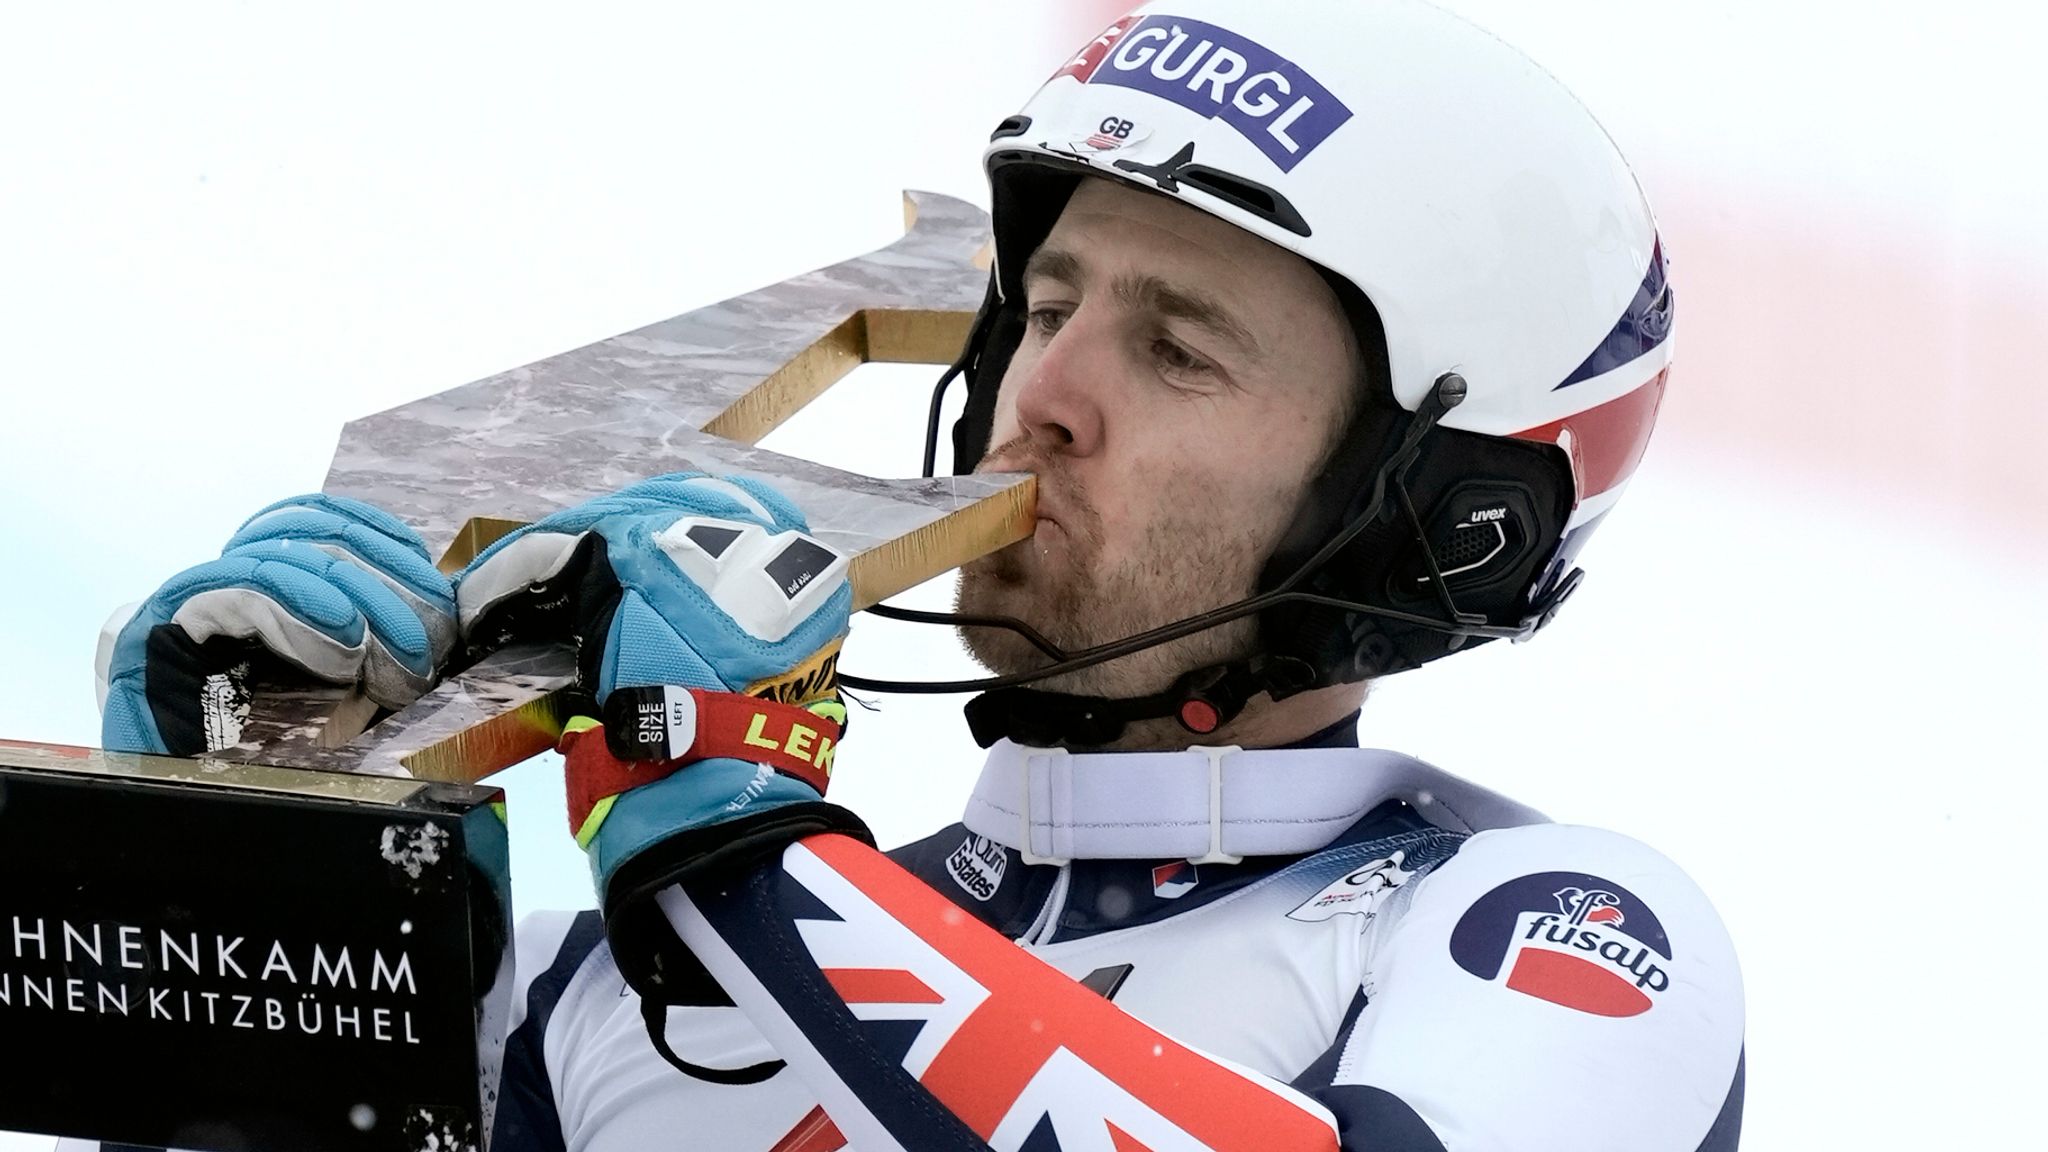 Dave Ryding wins slalom skiing Alpine World Cup to become first British champion in 55 years News Sky Sports